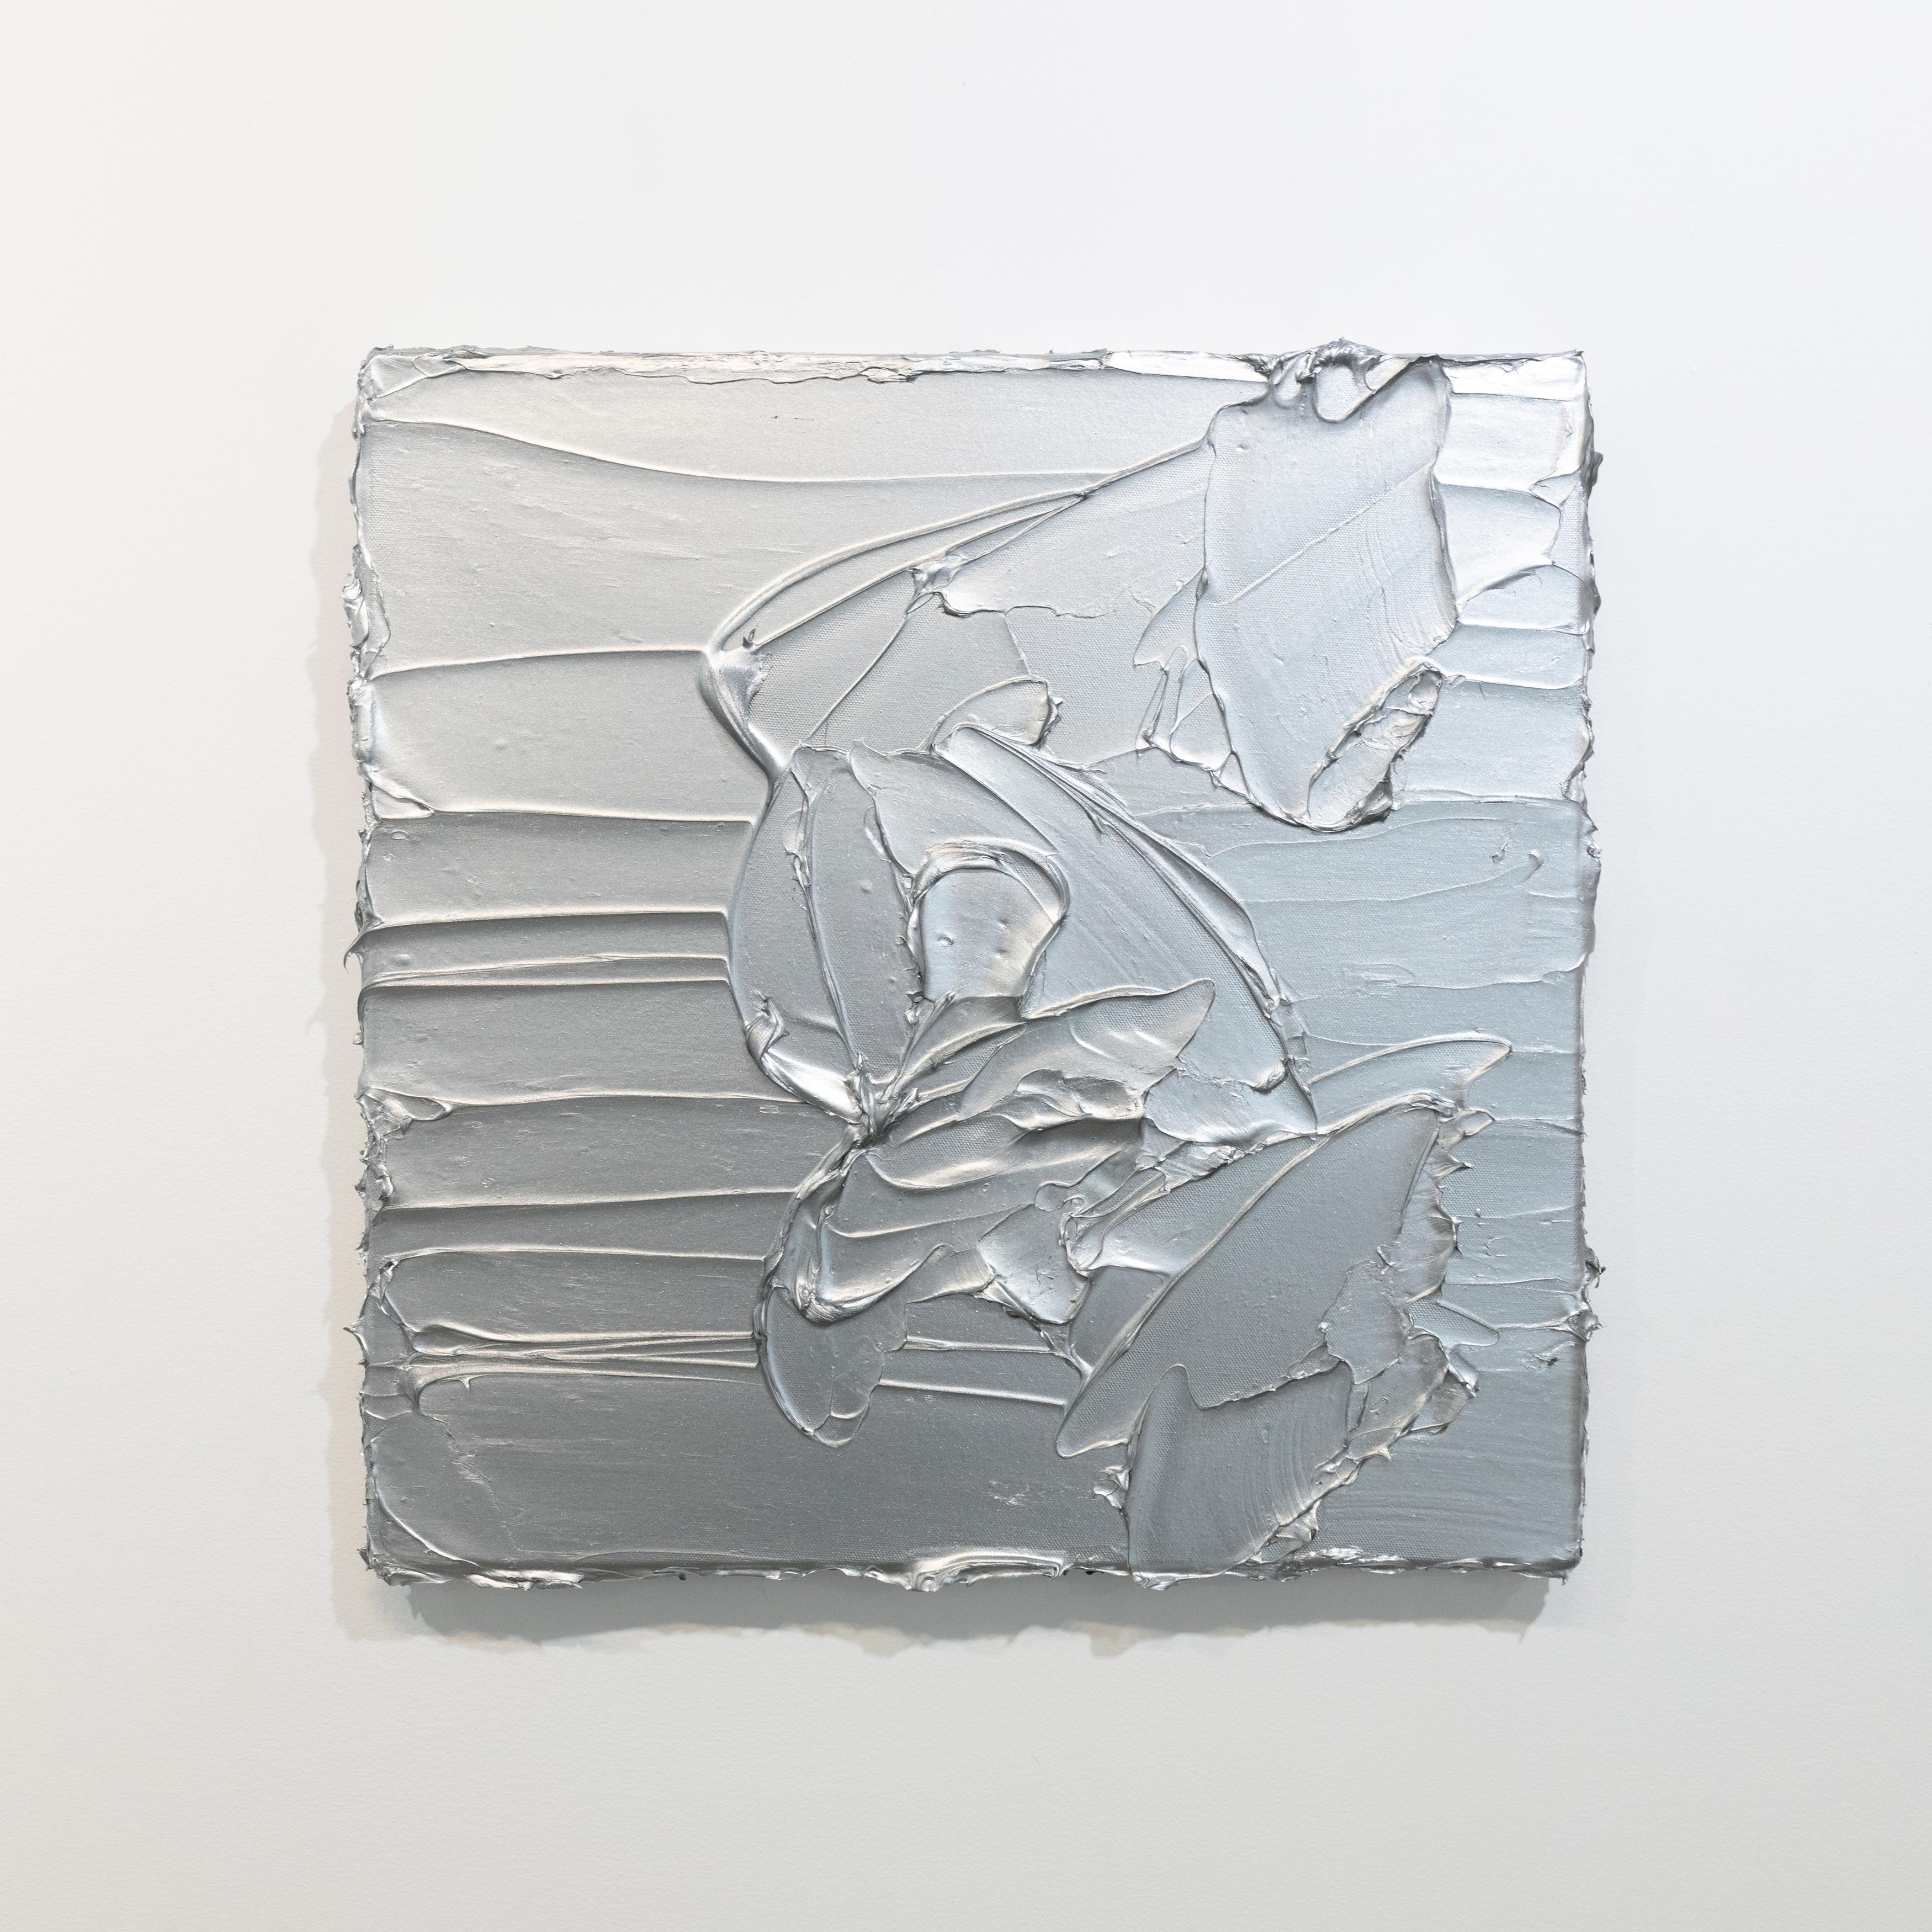 Teodora Guererra Abstract Sculpture - "No Place Like Chrome" Metallic Abstract Painting